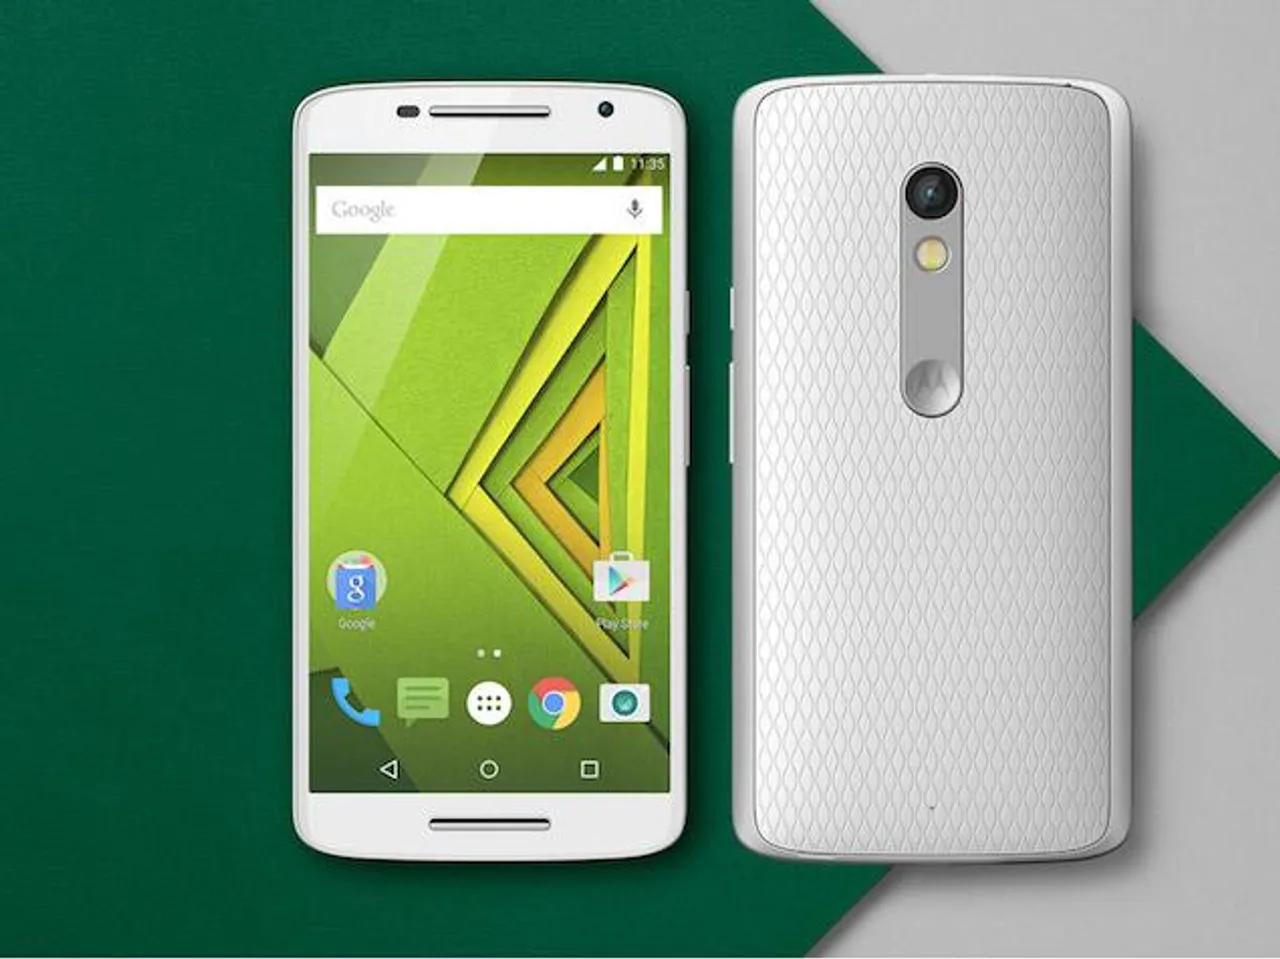 Motorola launches Moto X Play, priced at Rs 18,499